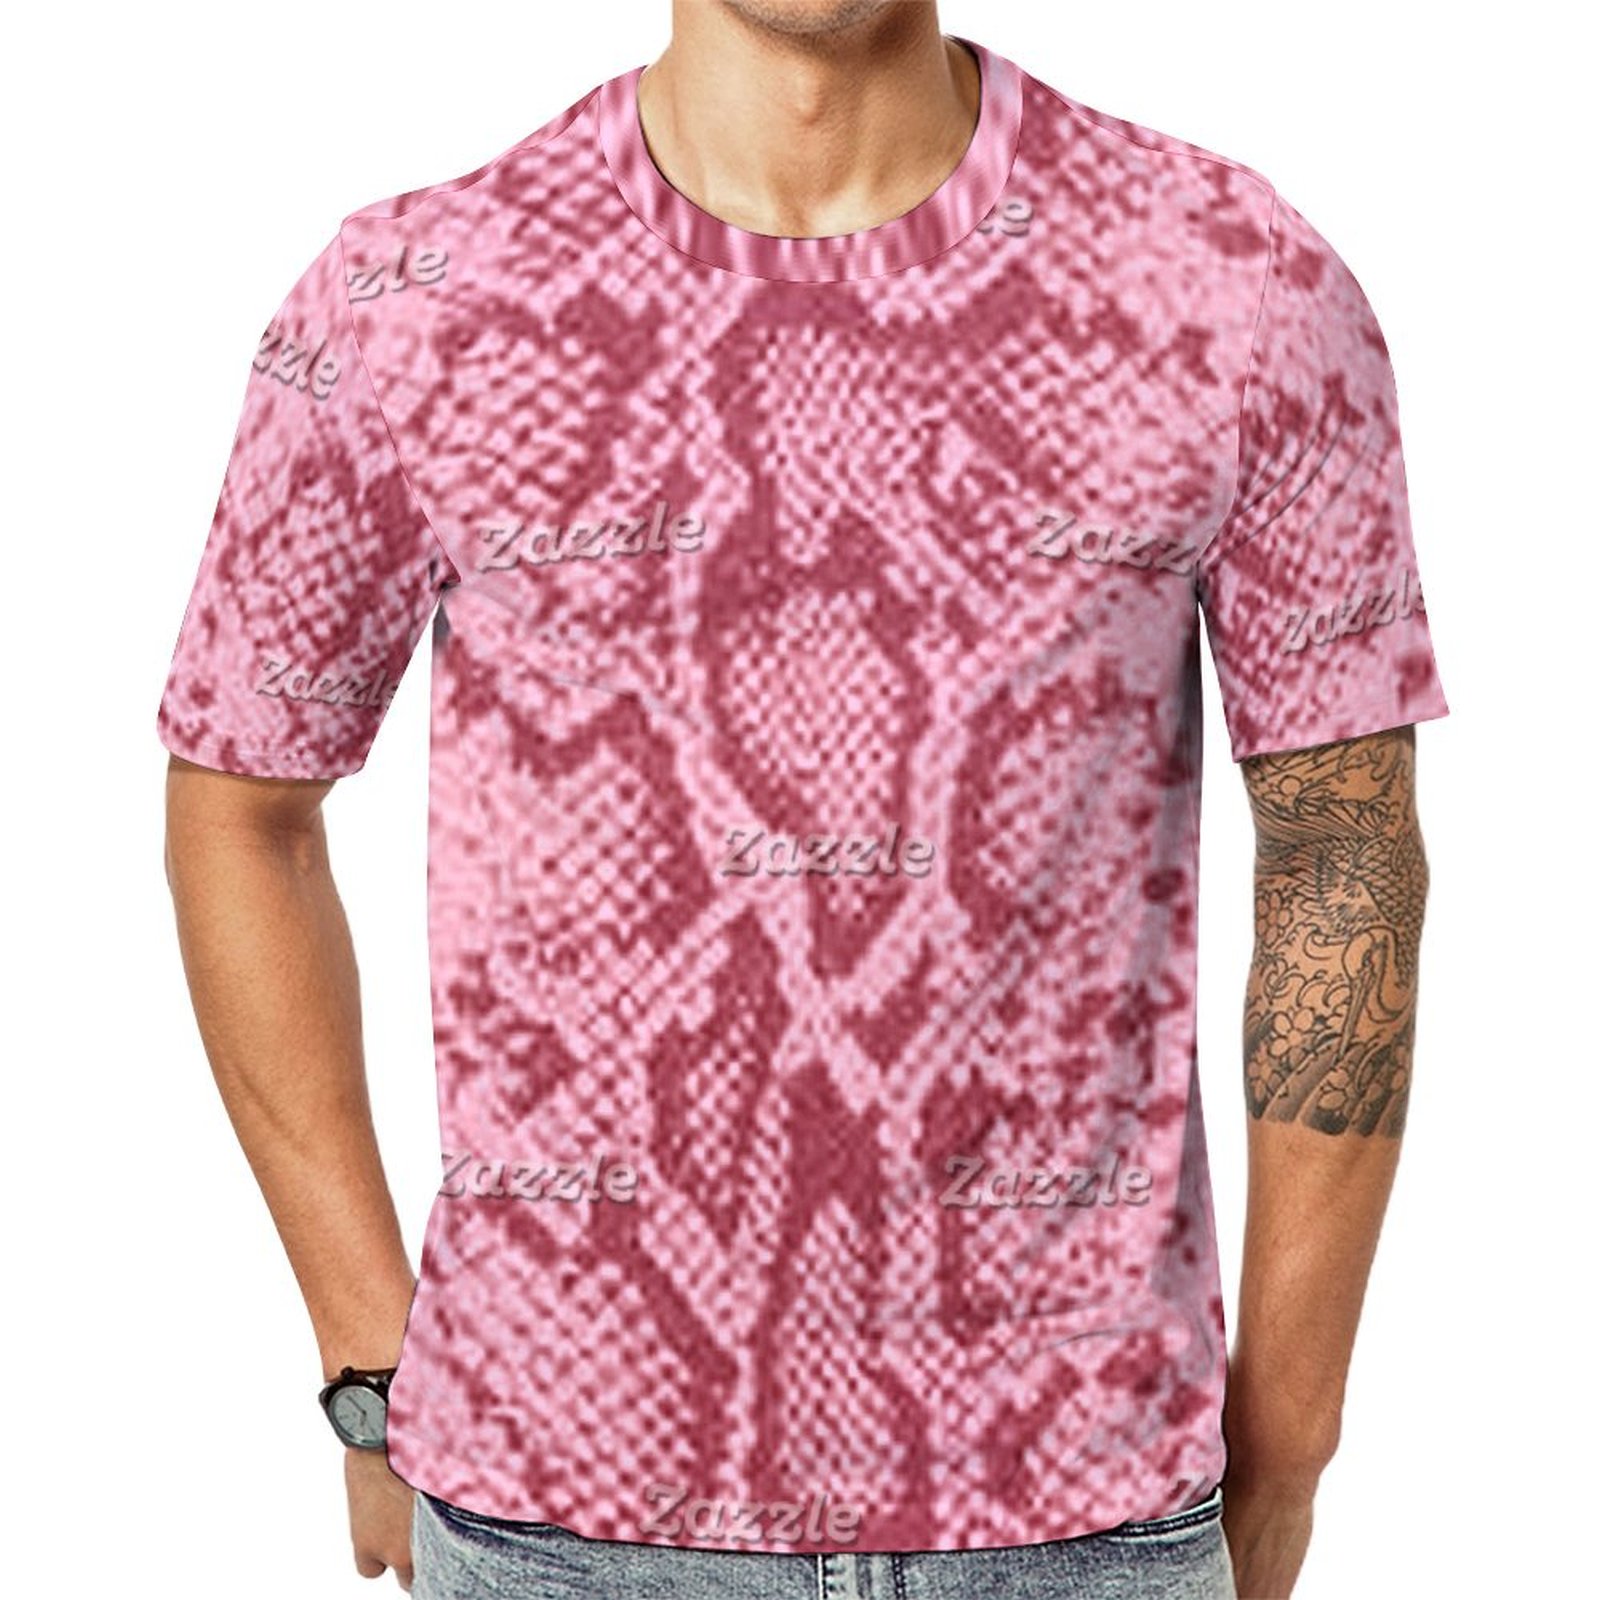 Exotic Snakeskin Short Sleeve Print Unisex Tshirt Summer Casual Tees for Men and Women Coolcoshirts